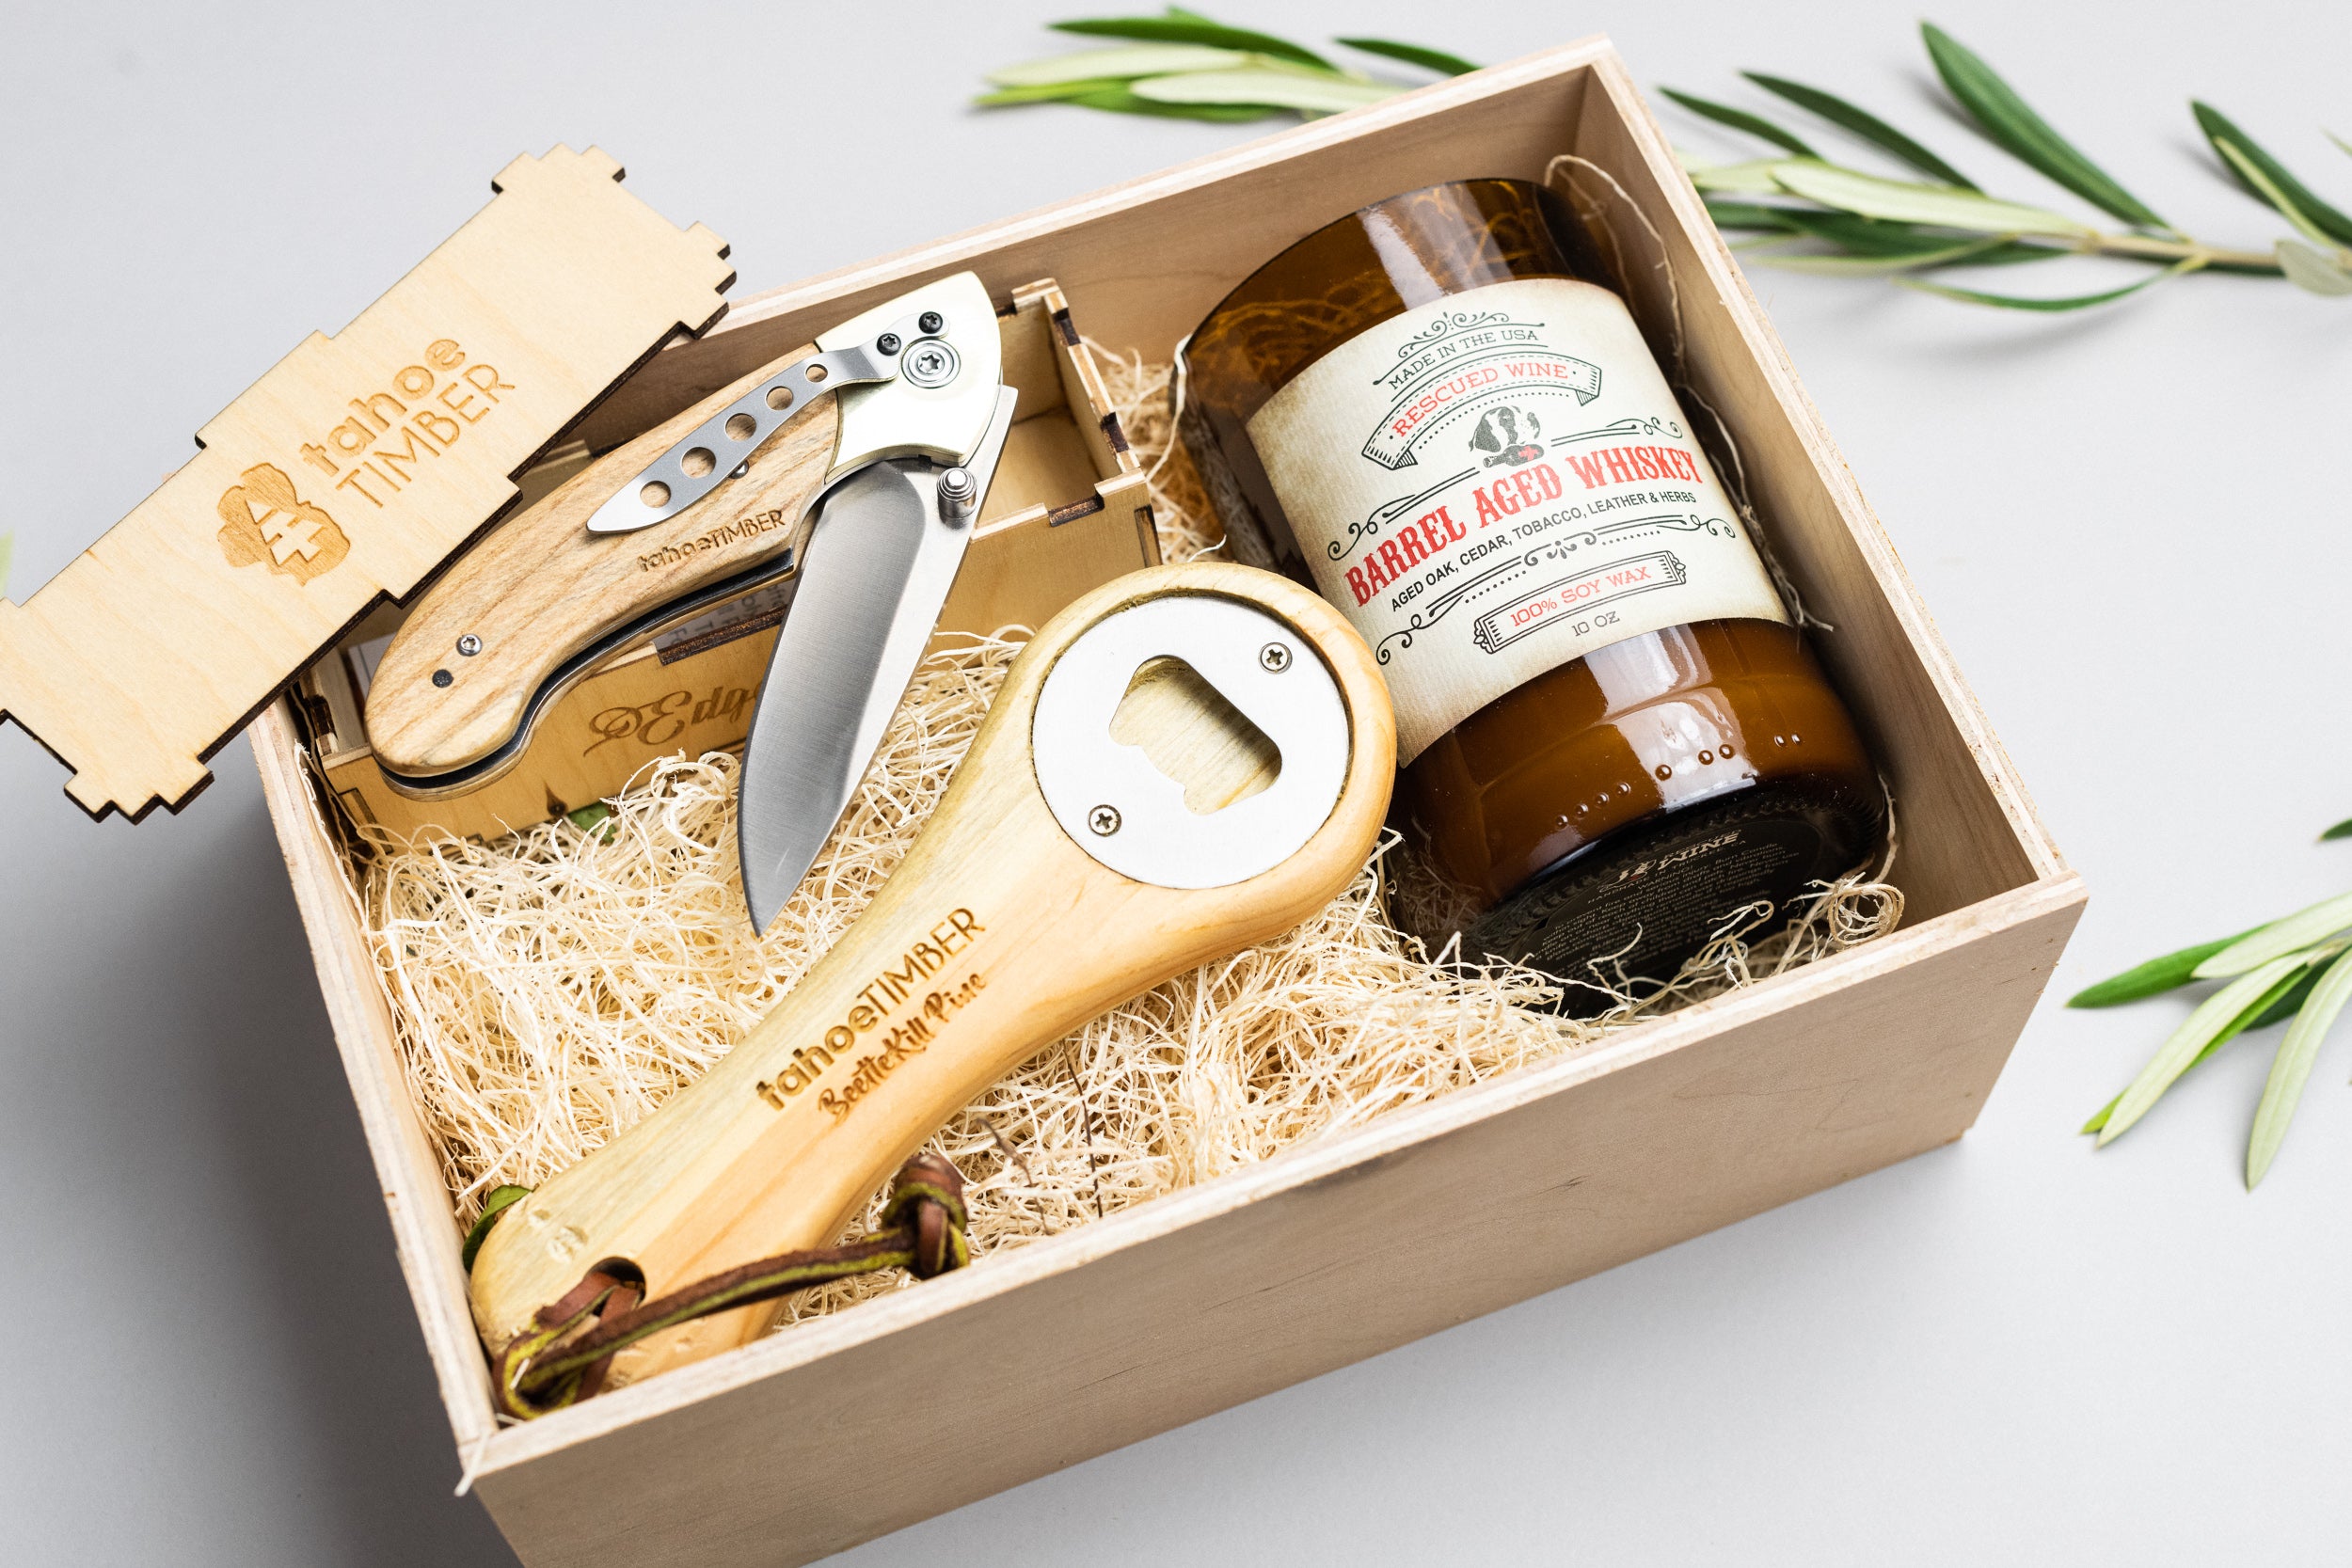 The Dude's Survival Kit Gift Box